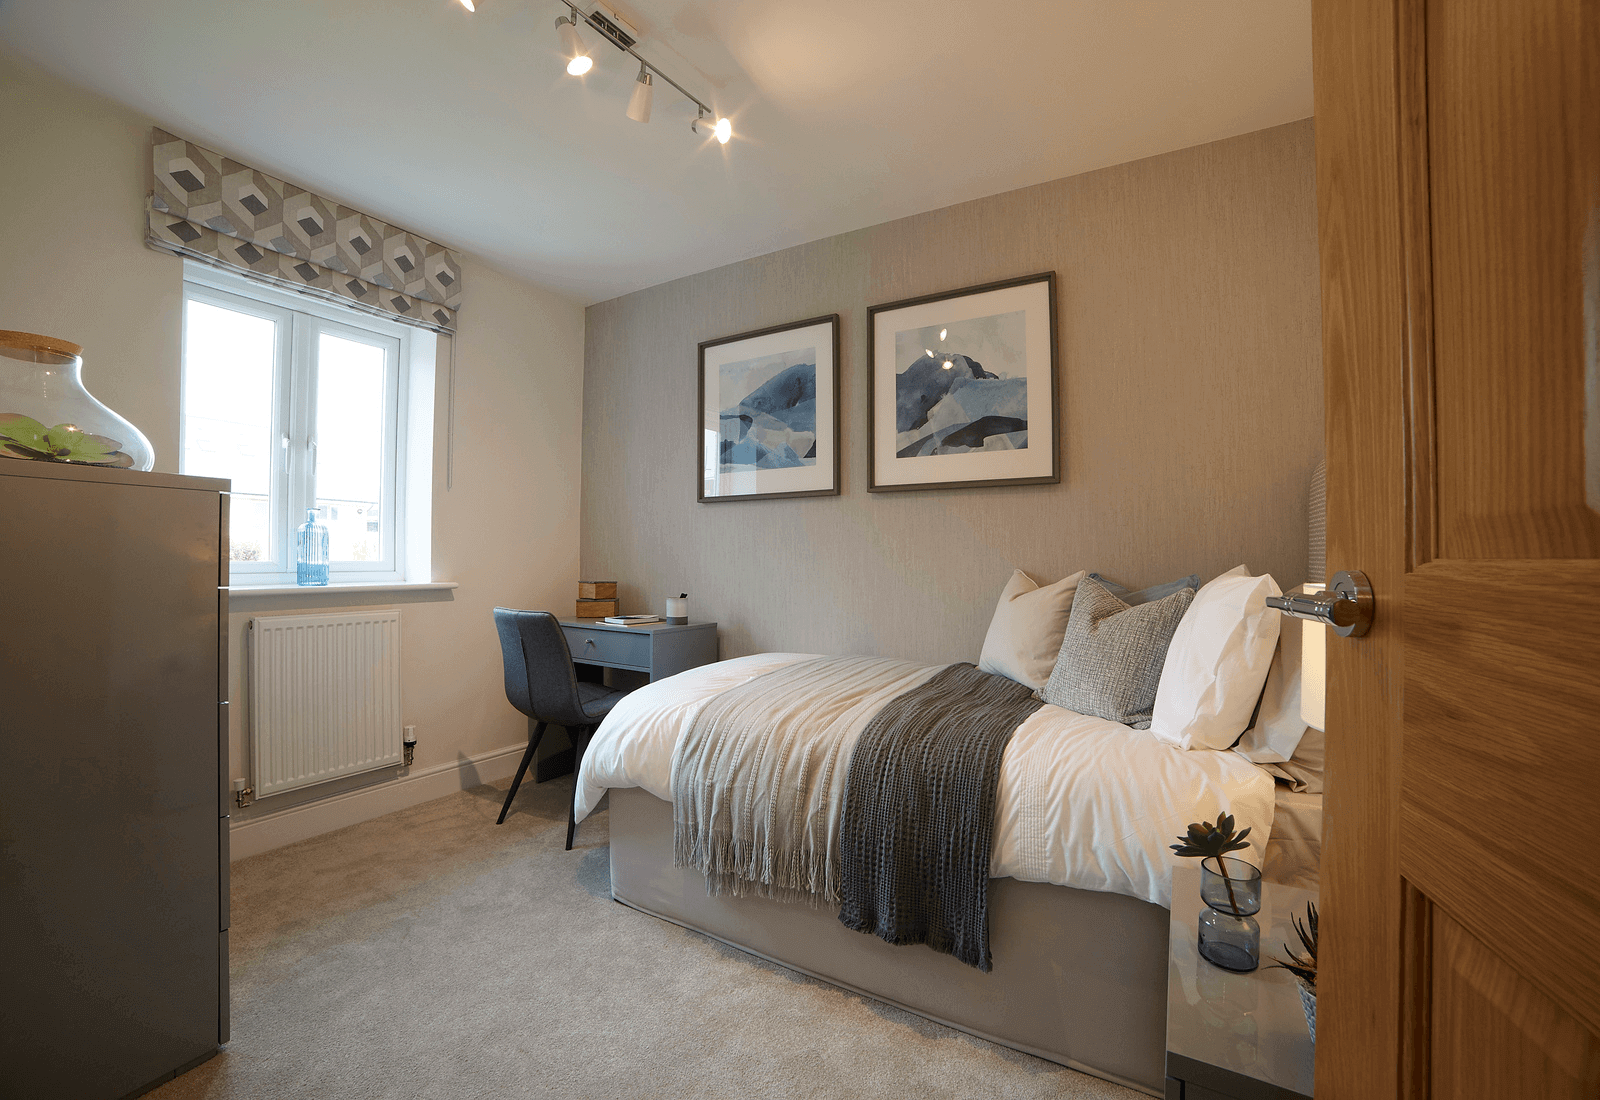 Bedroom 4 in a Hollin Show Home